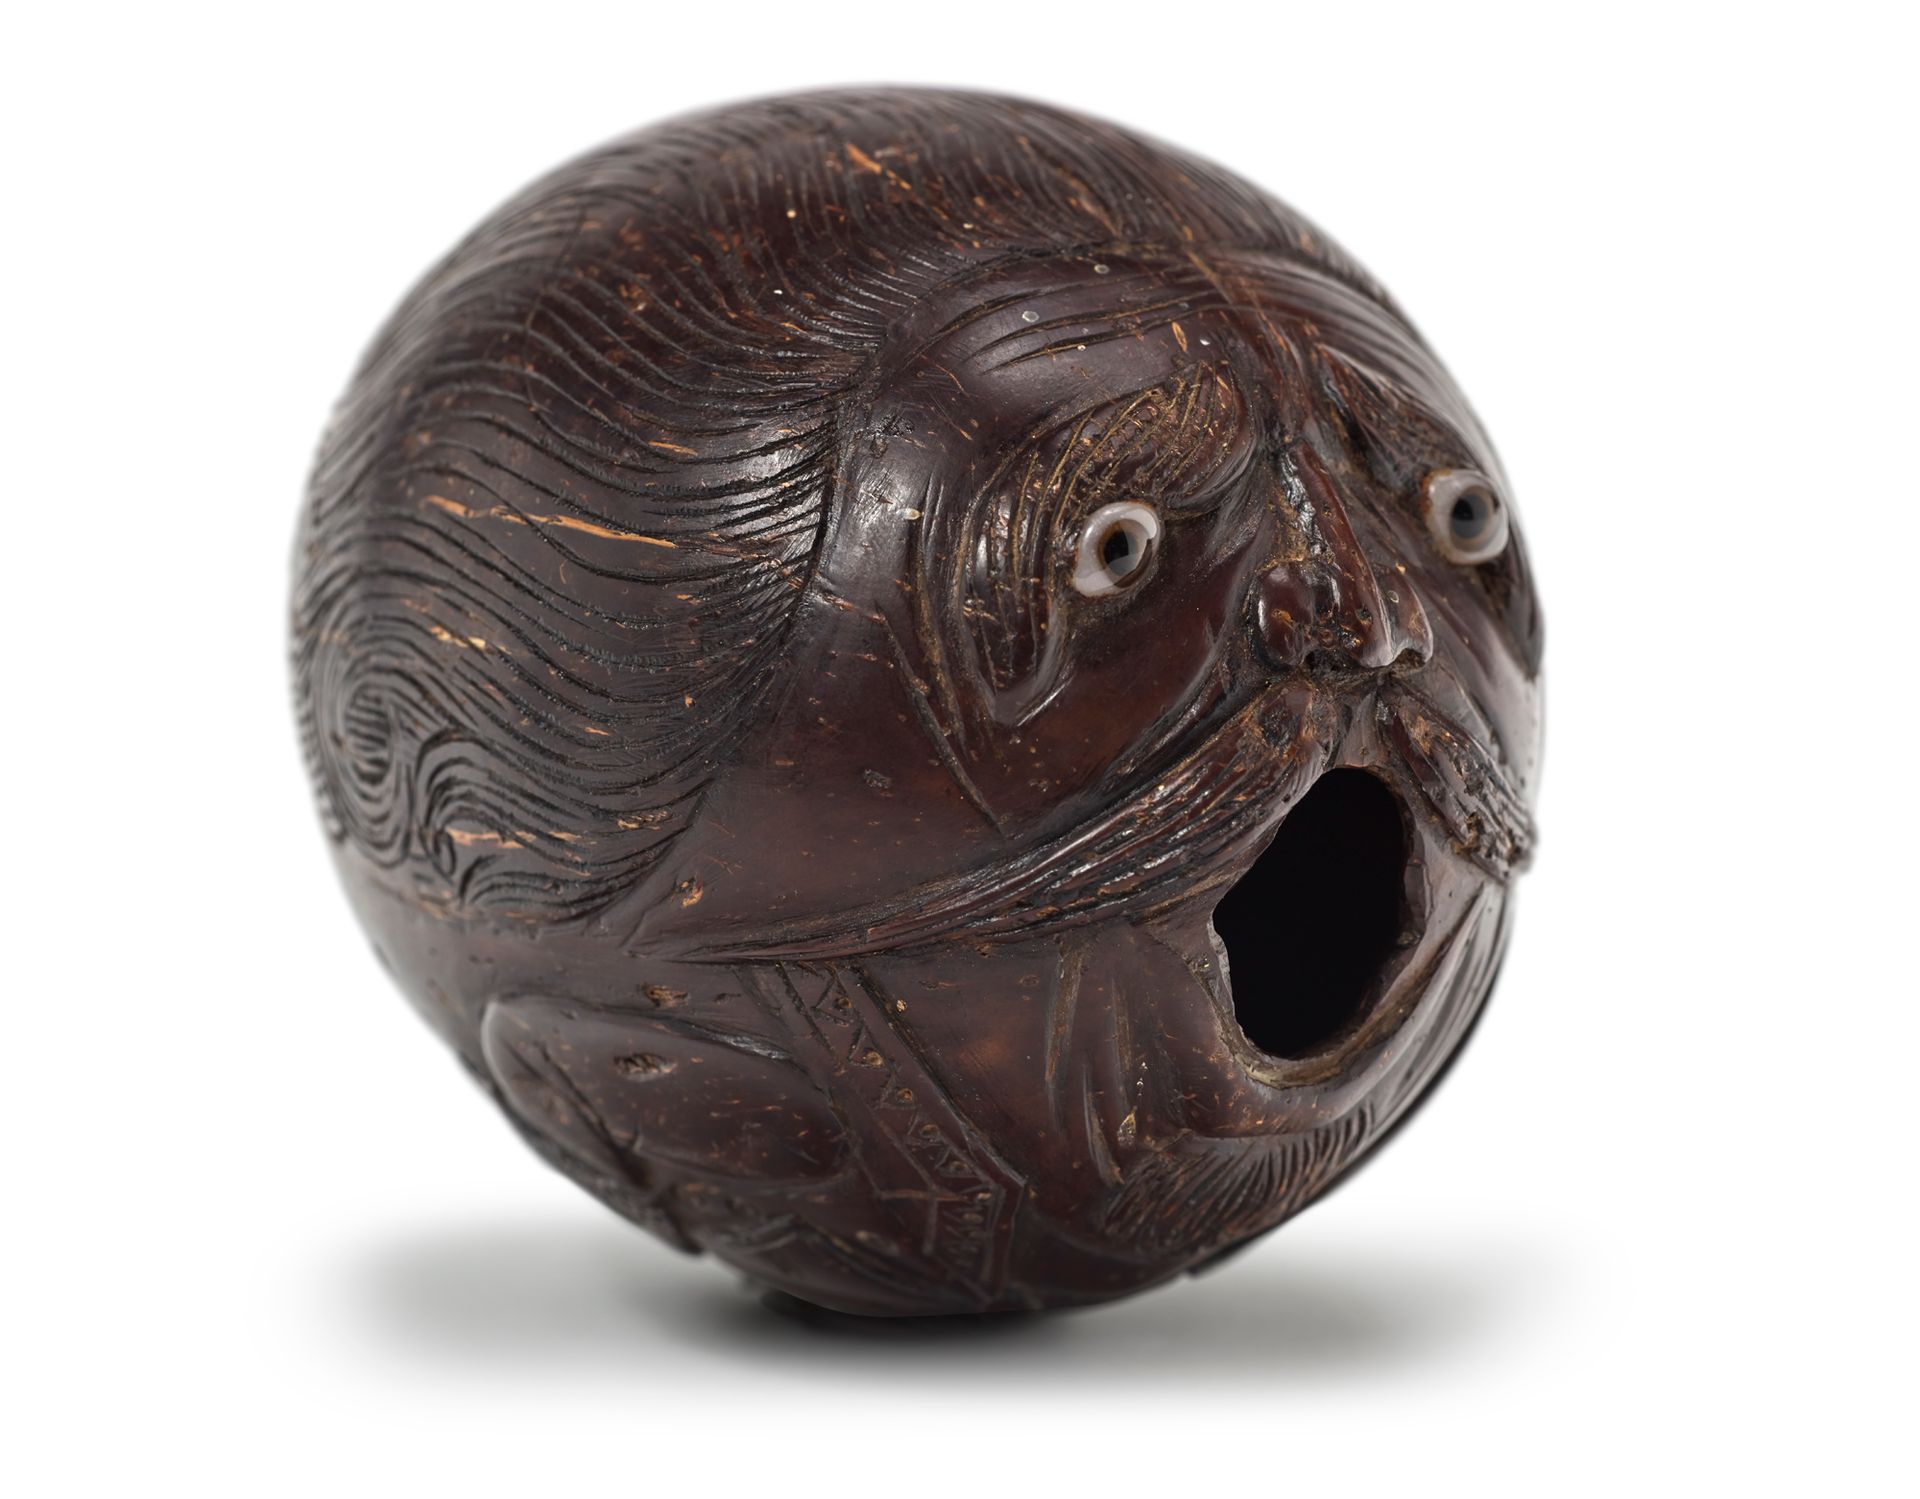 Null Coconut carved with a vociferous naval officer, late shipboard or prison wo&hellip;